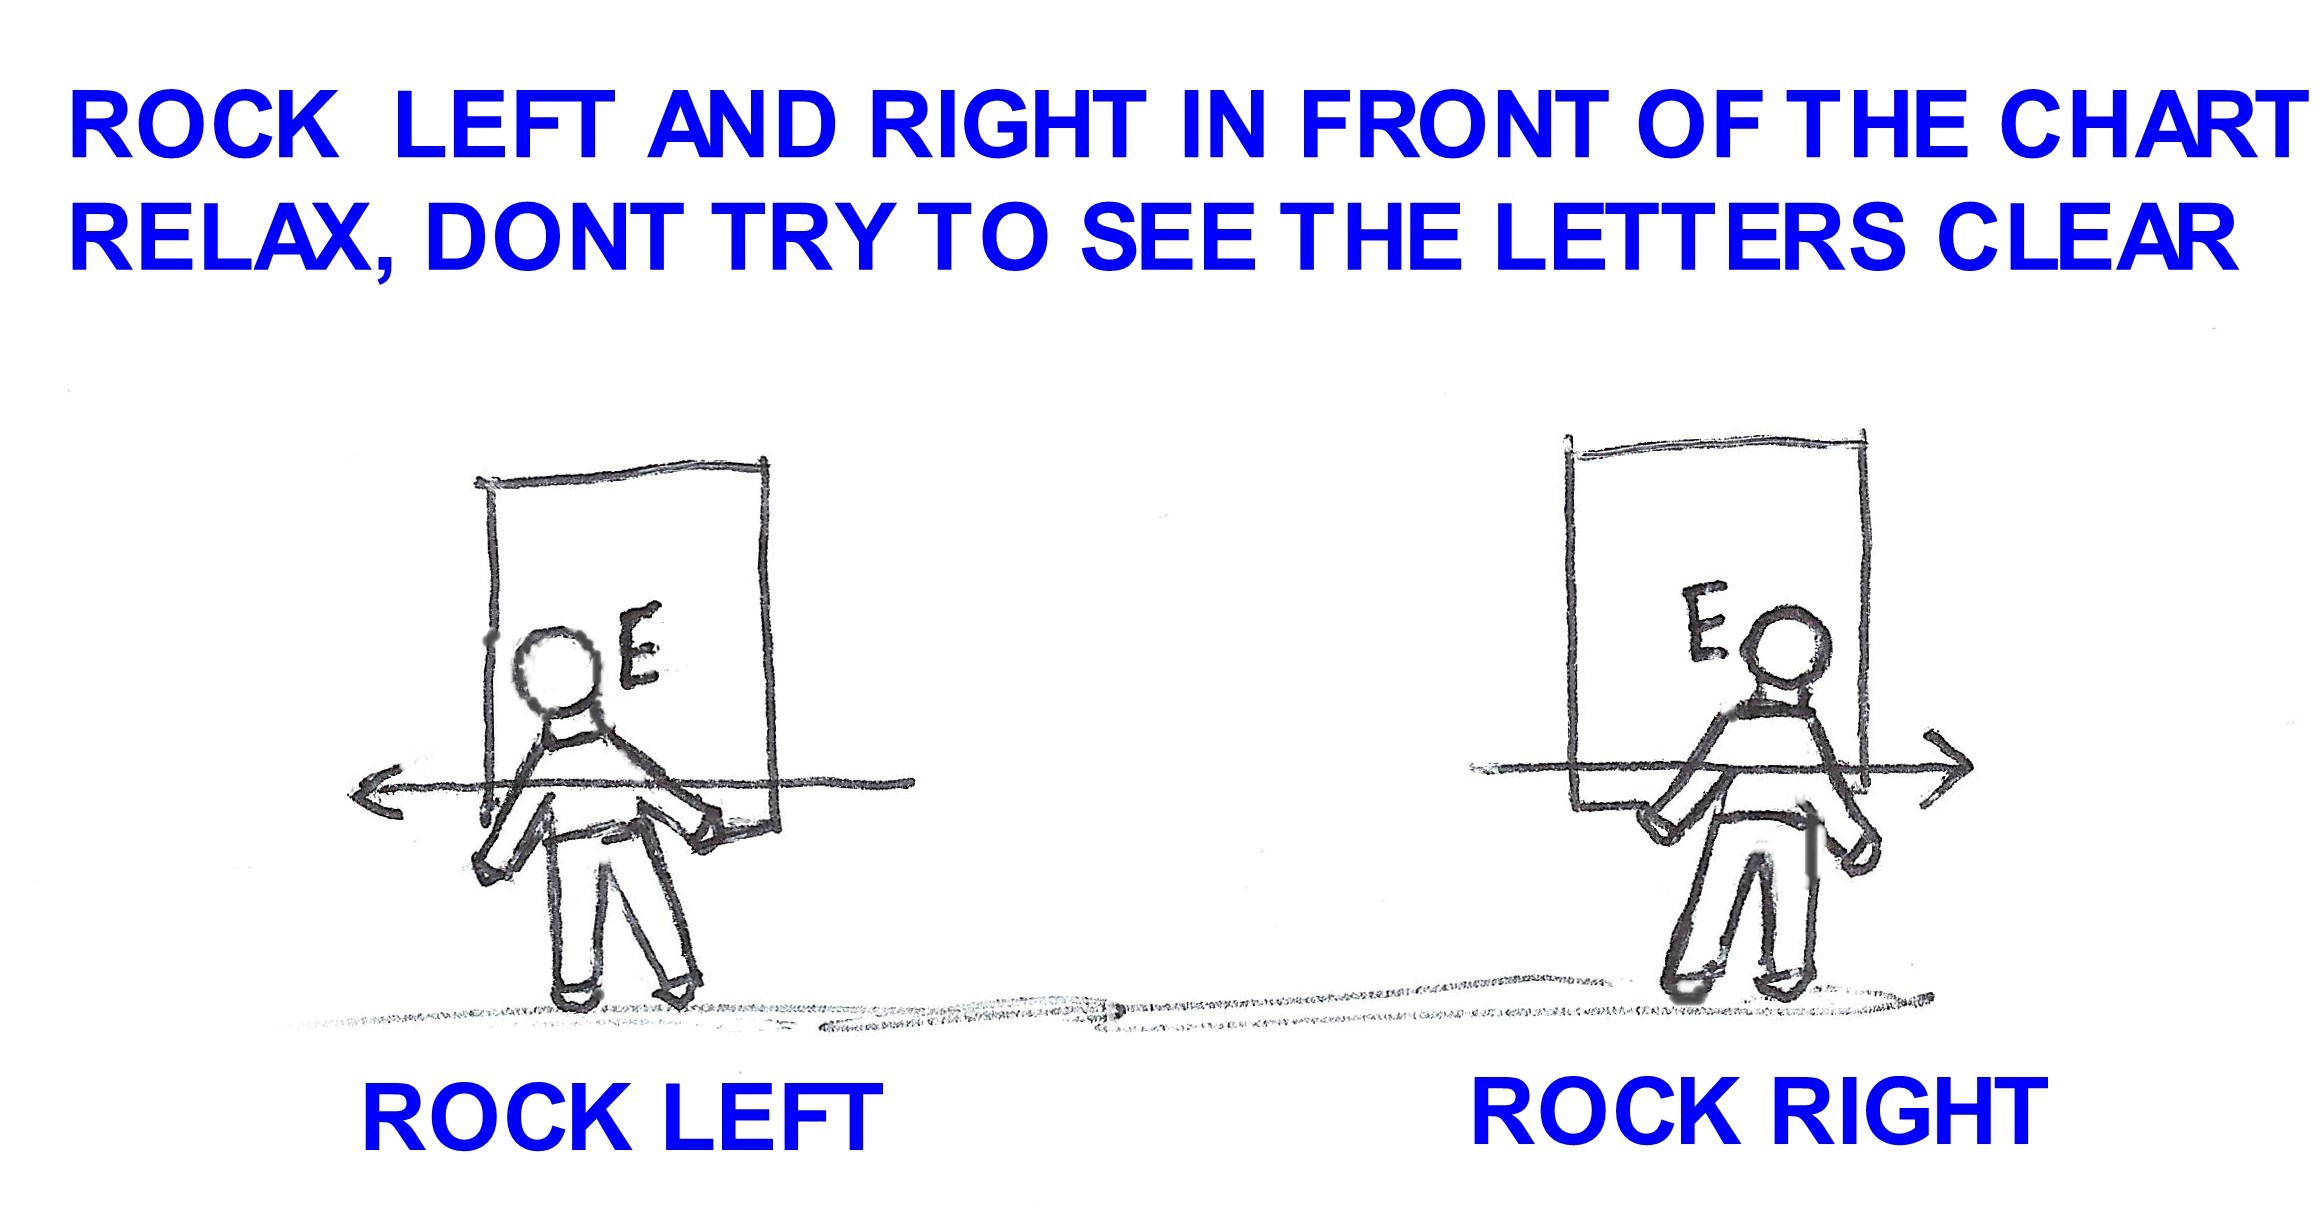 ROCK_LEFT_AND_RIGHT_IN_FRONT_OF_THE_CHART_002.jpg